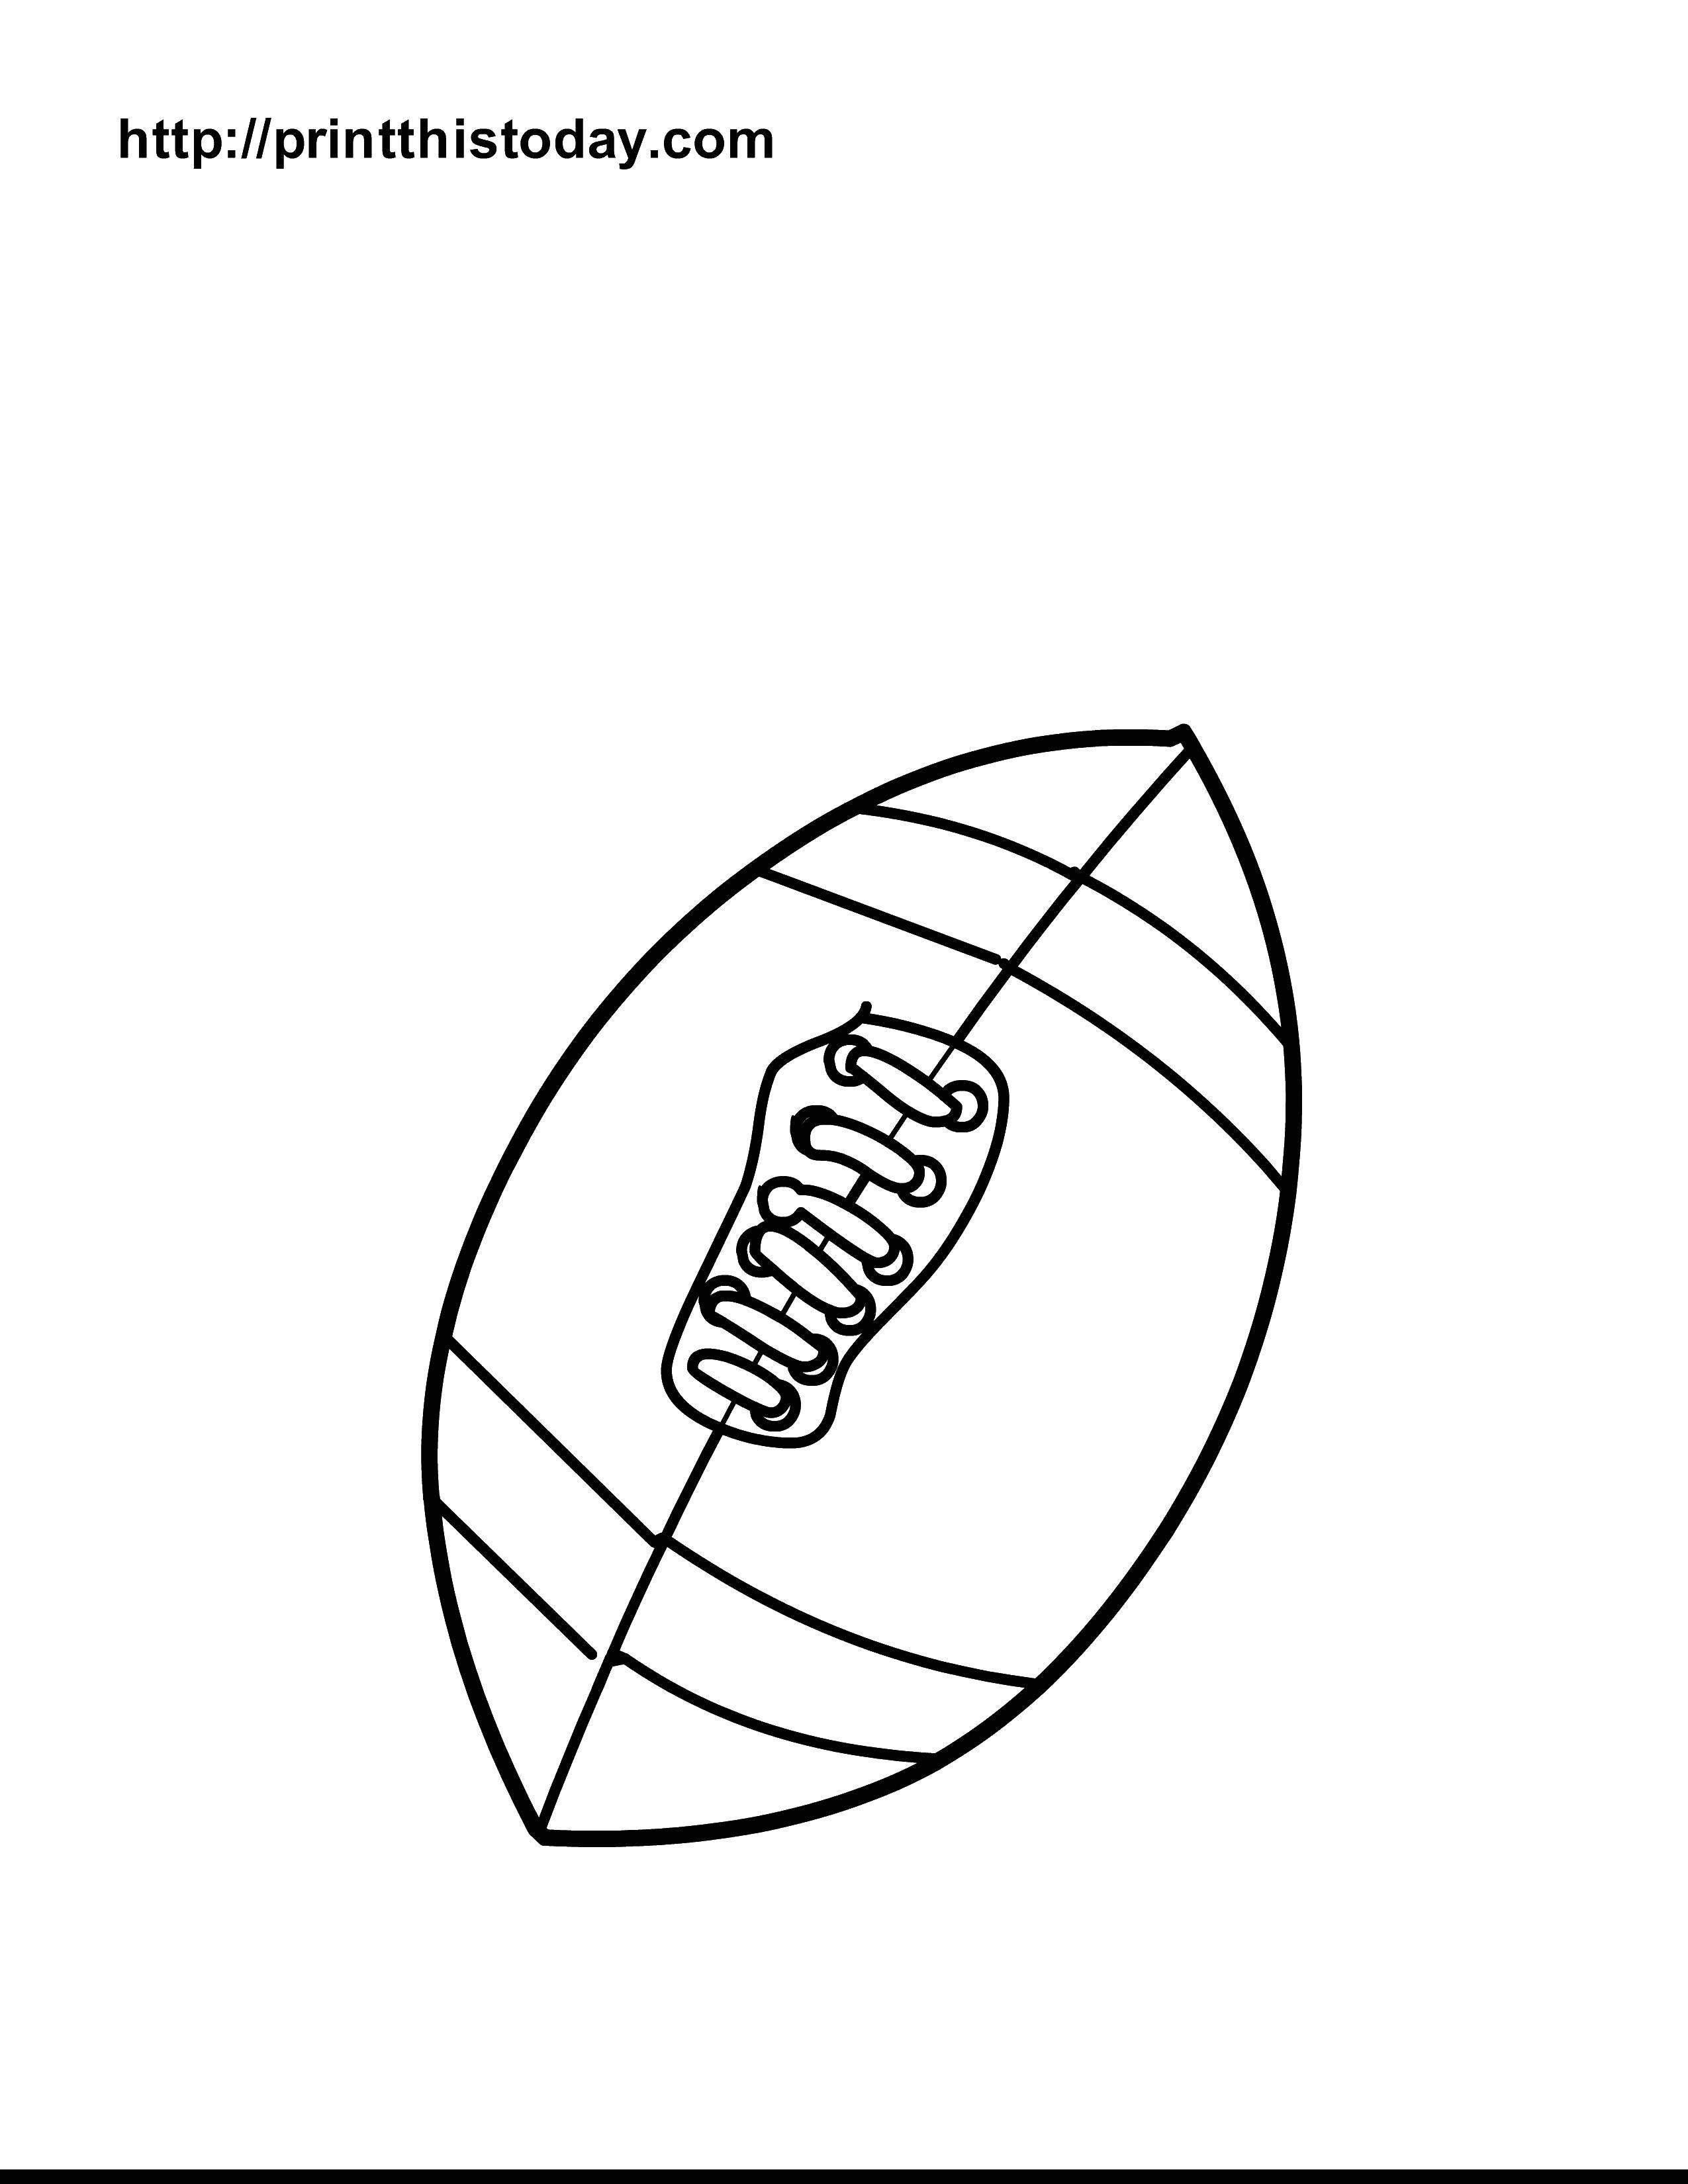 Coloring Ball for Rugby. Category Sports. Tags:  Sports, soccer, ball, game.